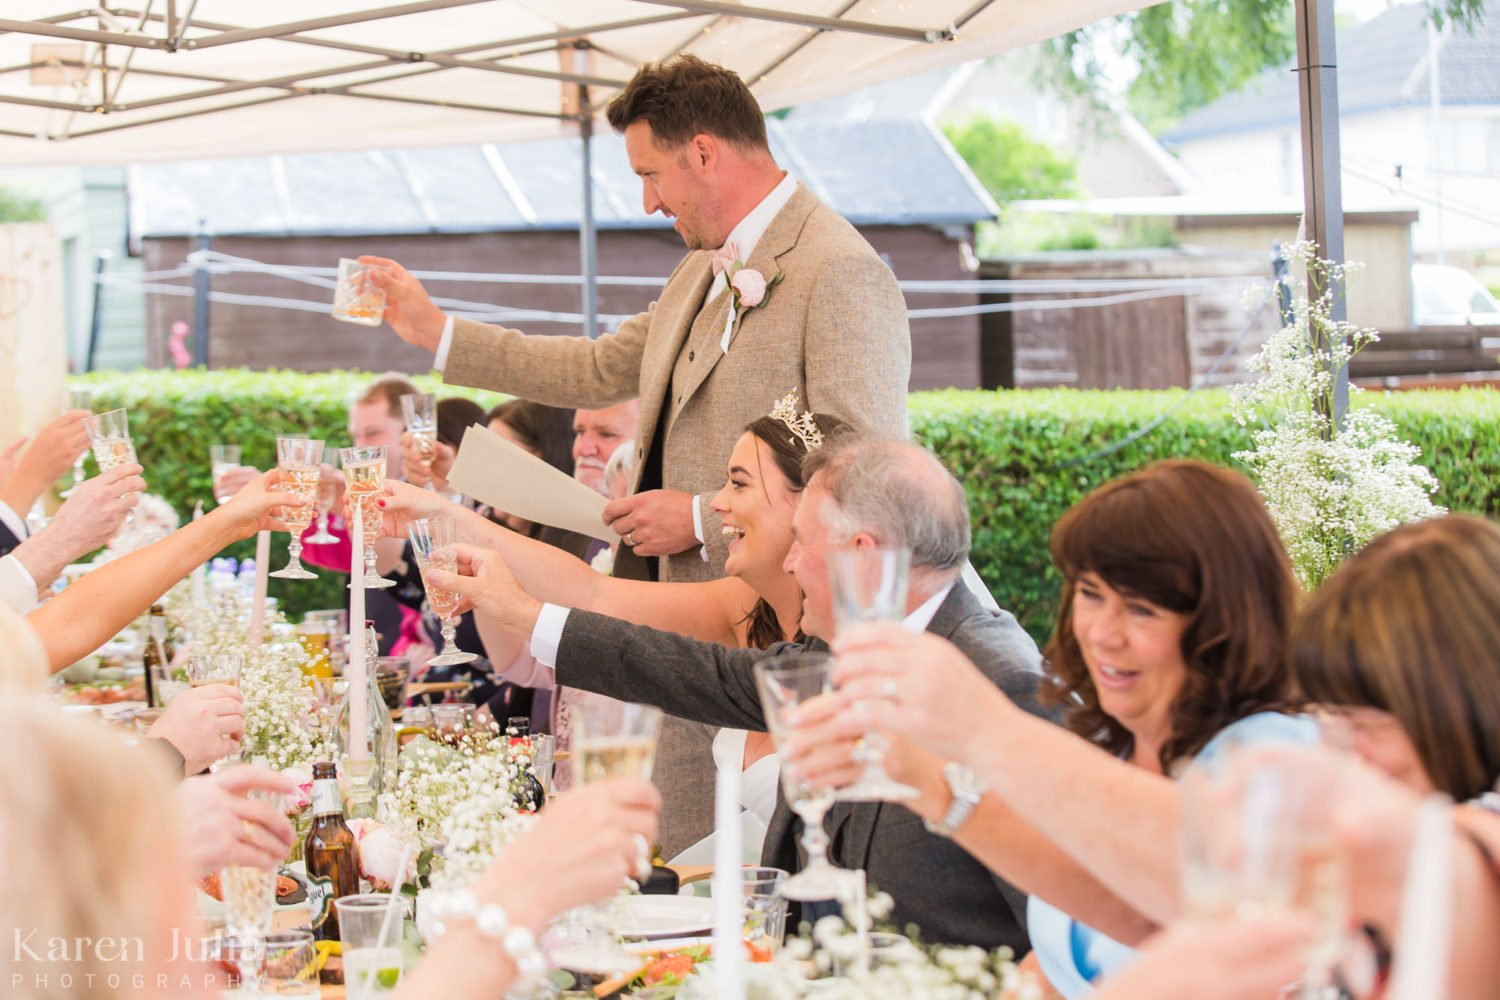 groom and guests raise glasses to toast during garden party reception